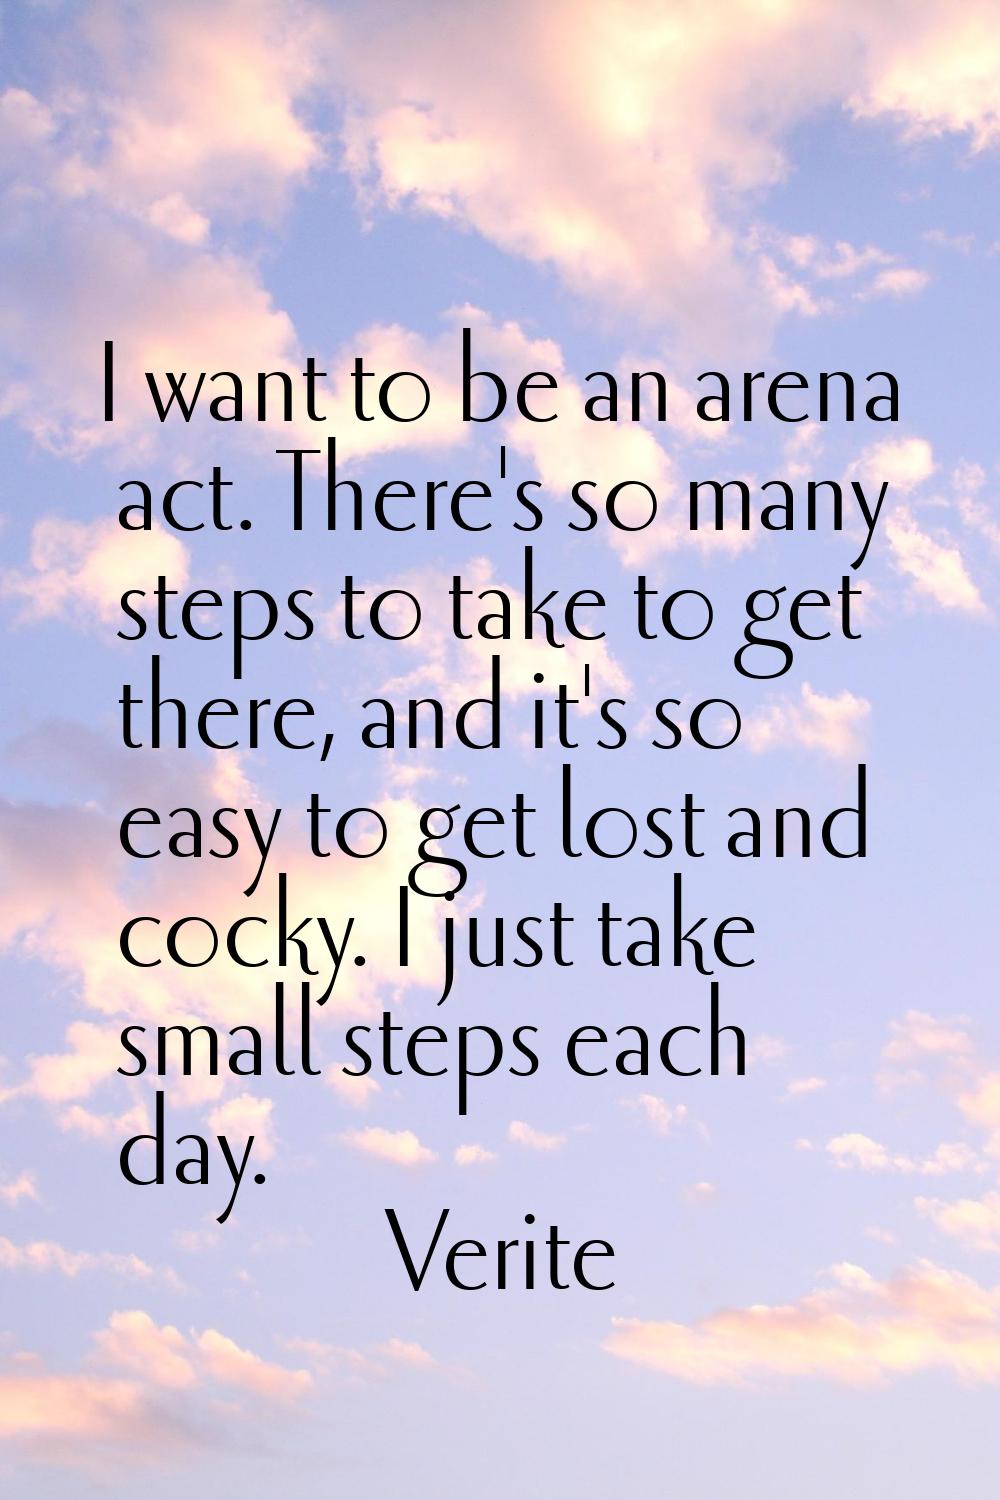 I want to be an arena act. There's so many steps to take to get there, and it's so easy to get lost